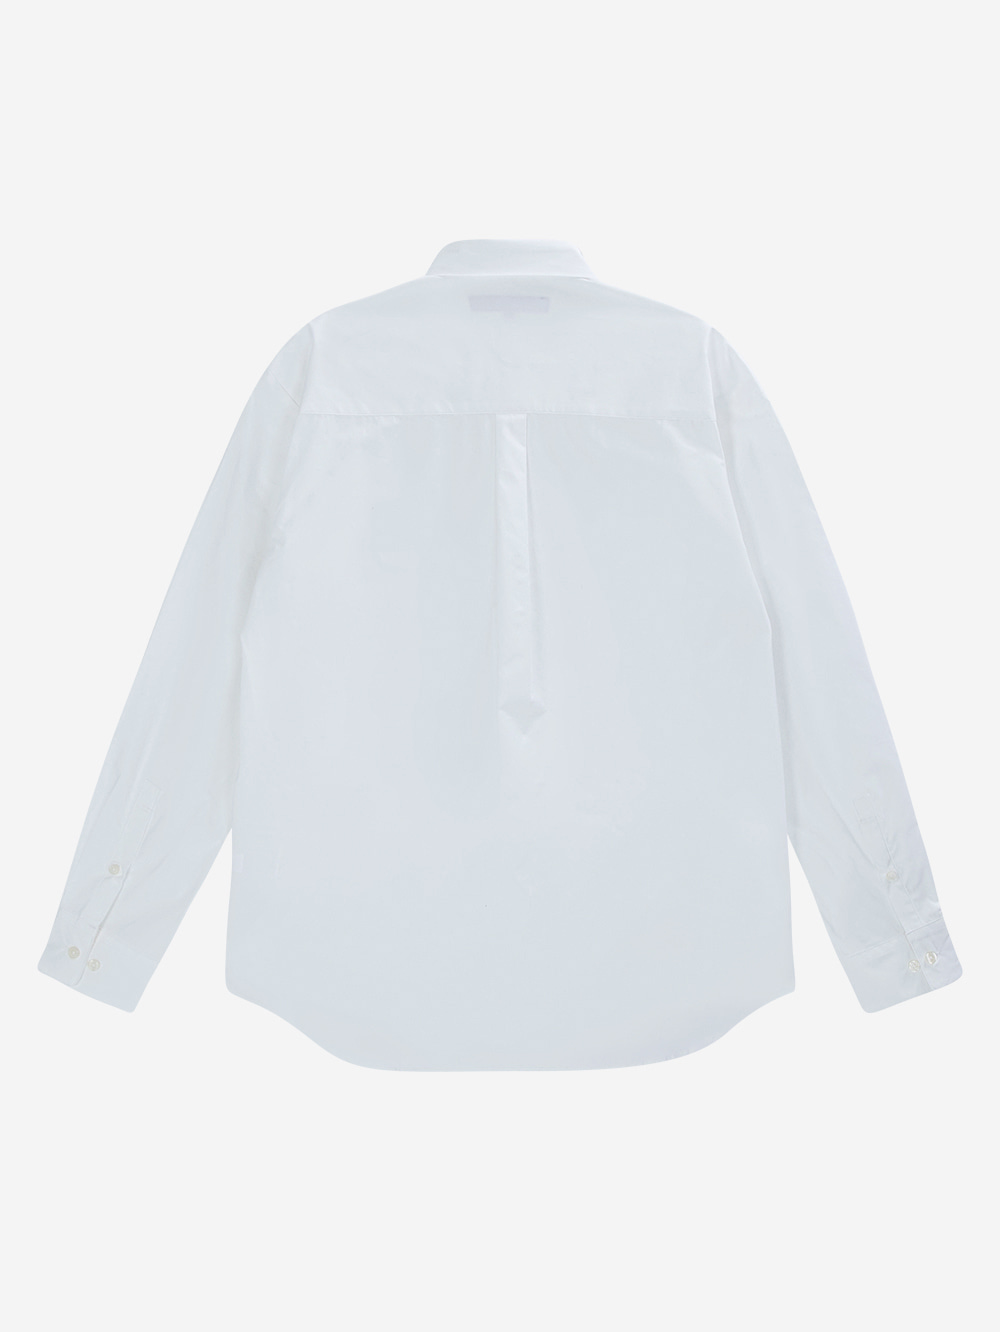 Solid Standard Loose Fit Shirt_White